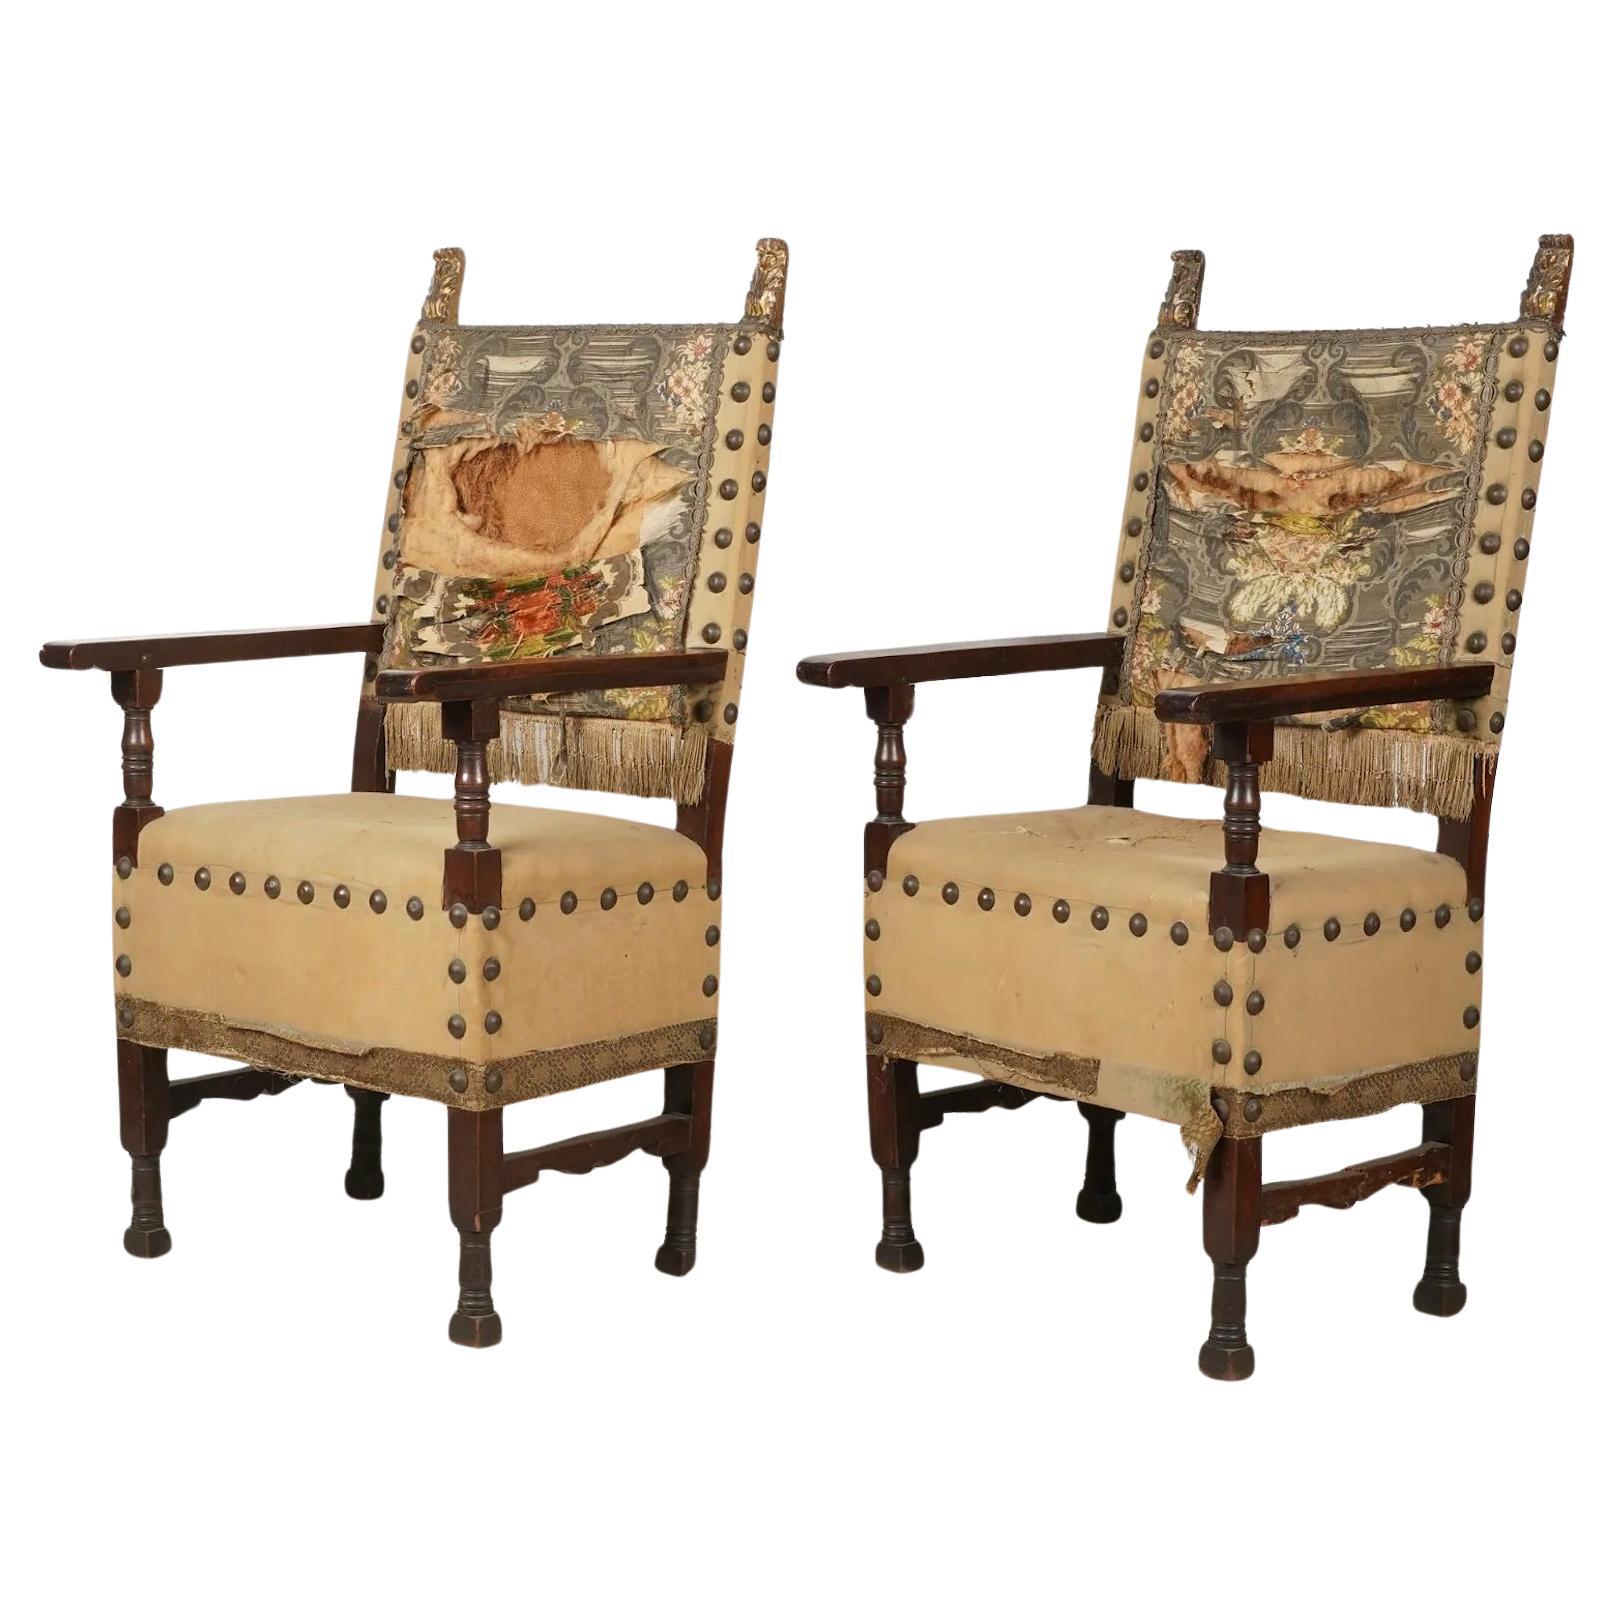 Antique Pair Spanish Baroque Colonial Revival Walnut Hall Chairs 18th Century  For Sale